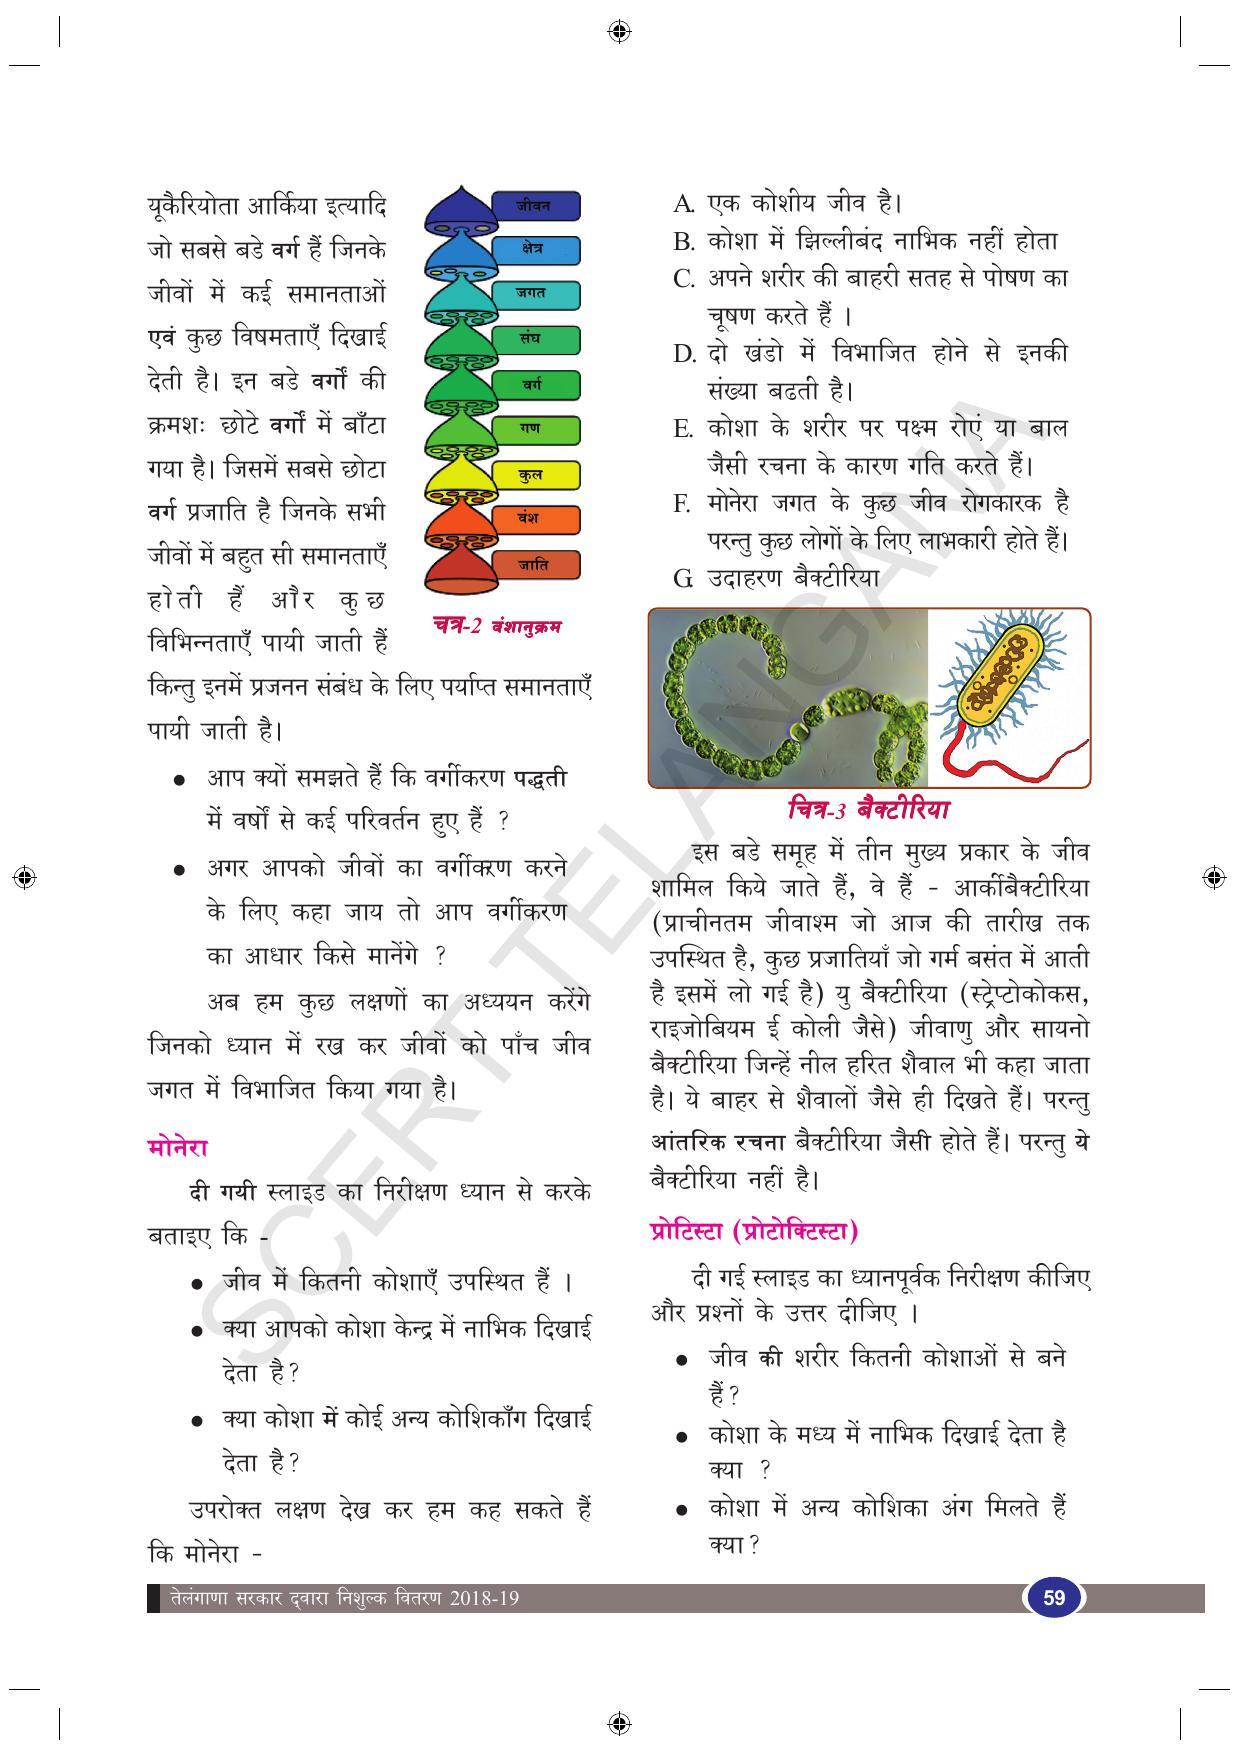 TS SCERT Class 9 Biological Science (Hindi Medium) Text Book - Page 71